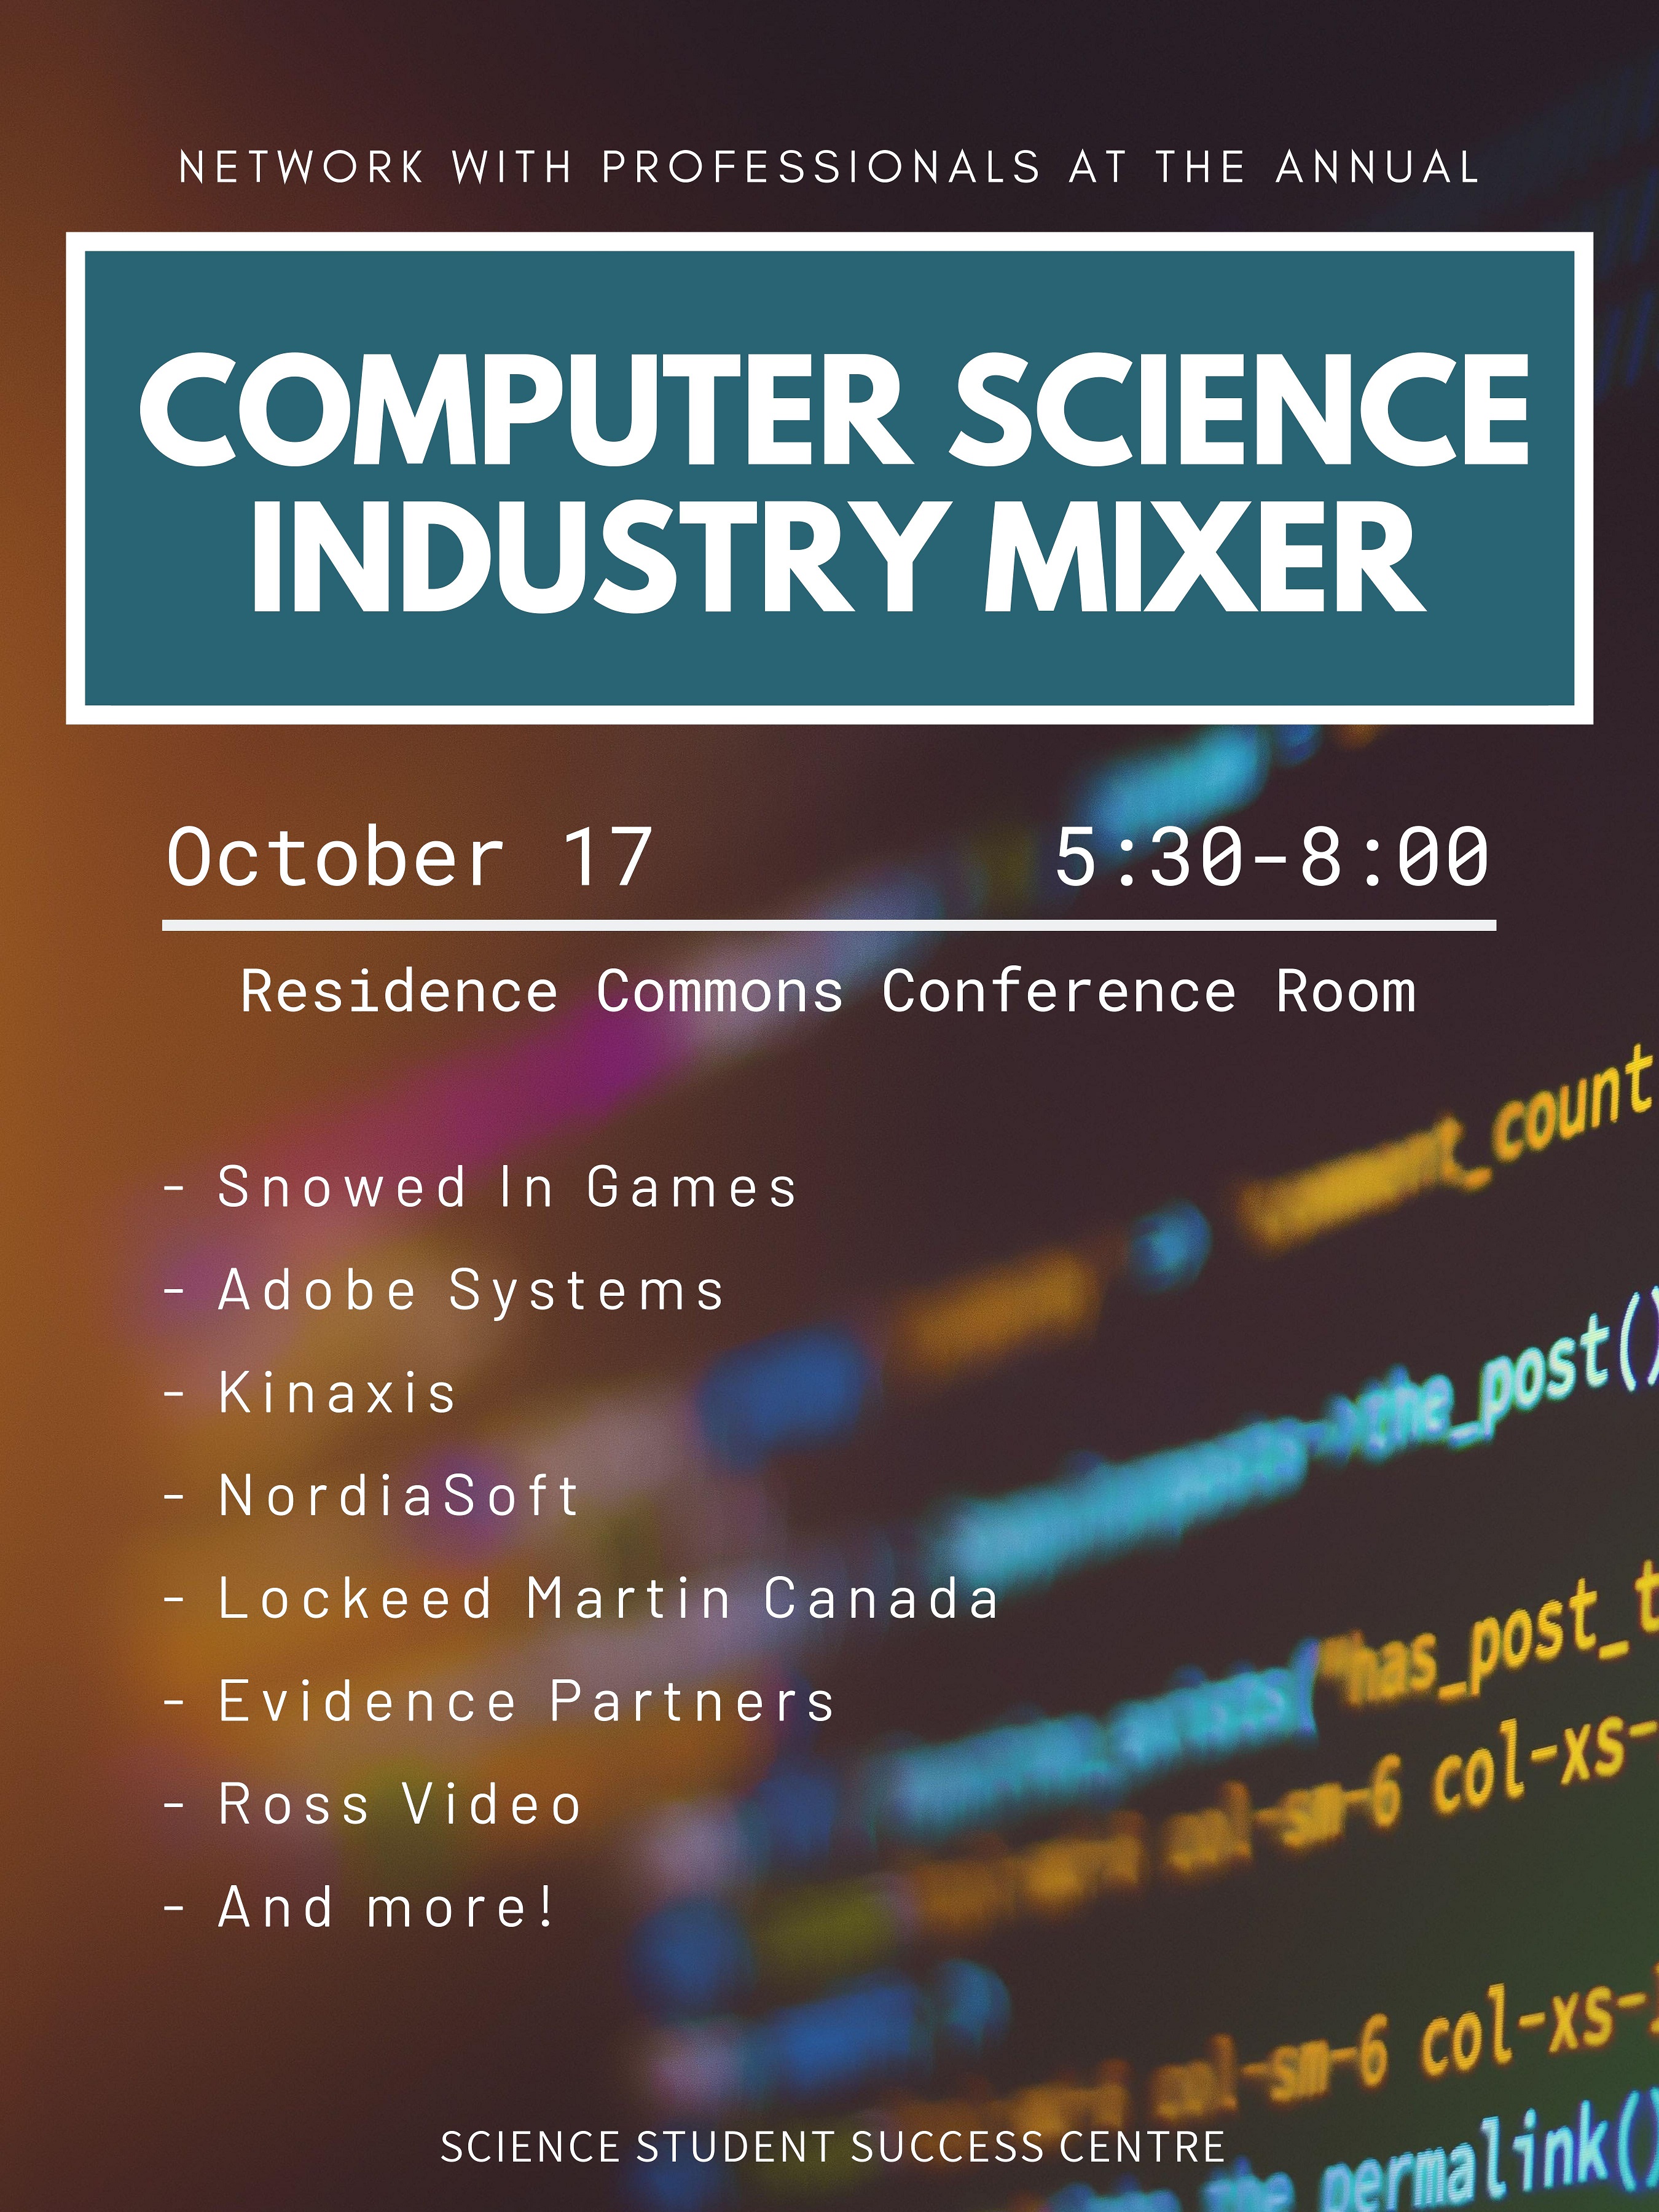 A poster for Computer Science Industry Mixer on October 17th at 5:30pm in Residence Commons